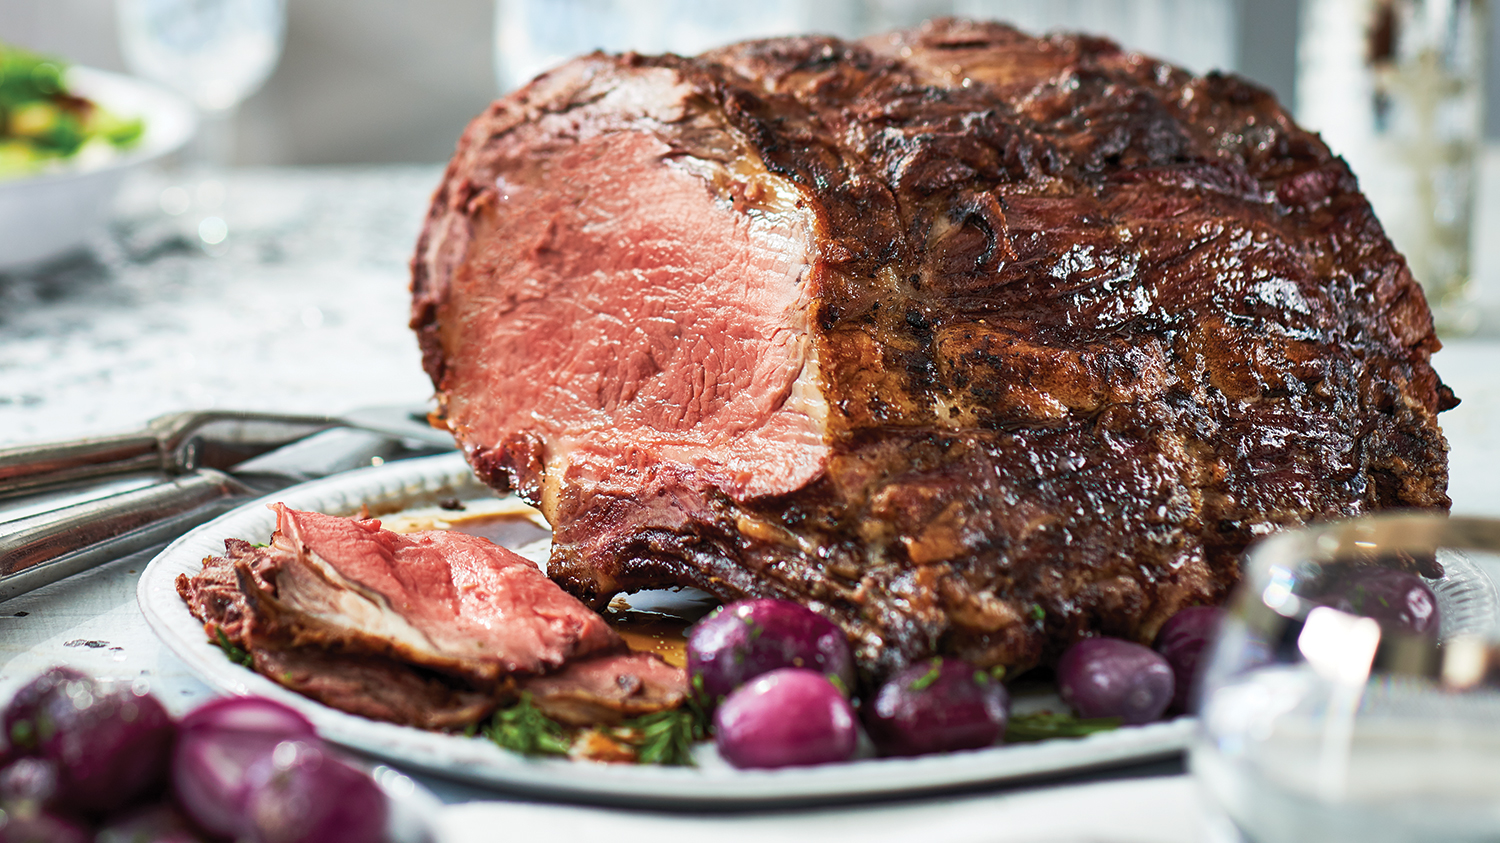 Read more about Salt-Crusted Sterling Silver® Prime Rib Roast